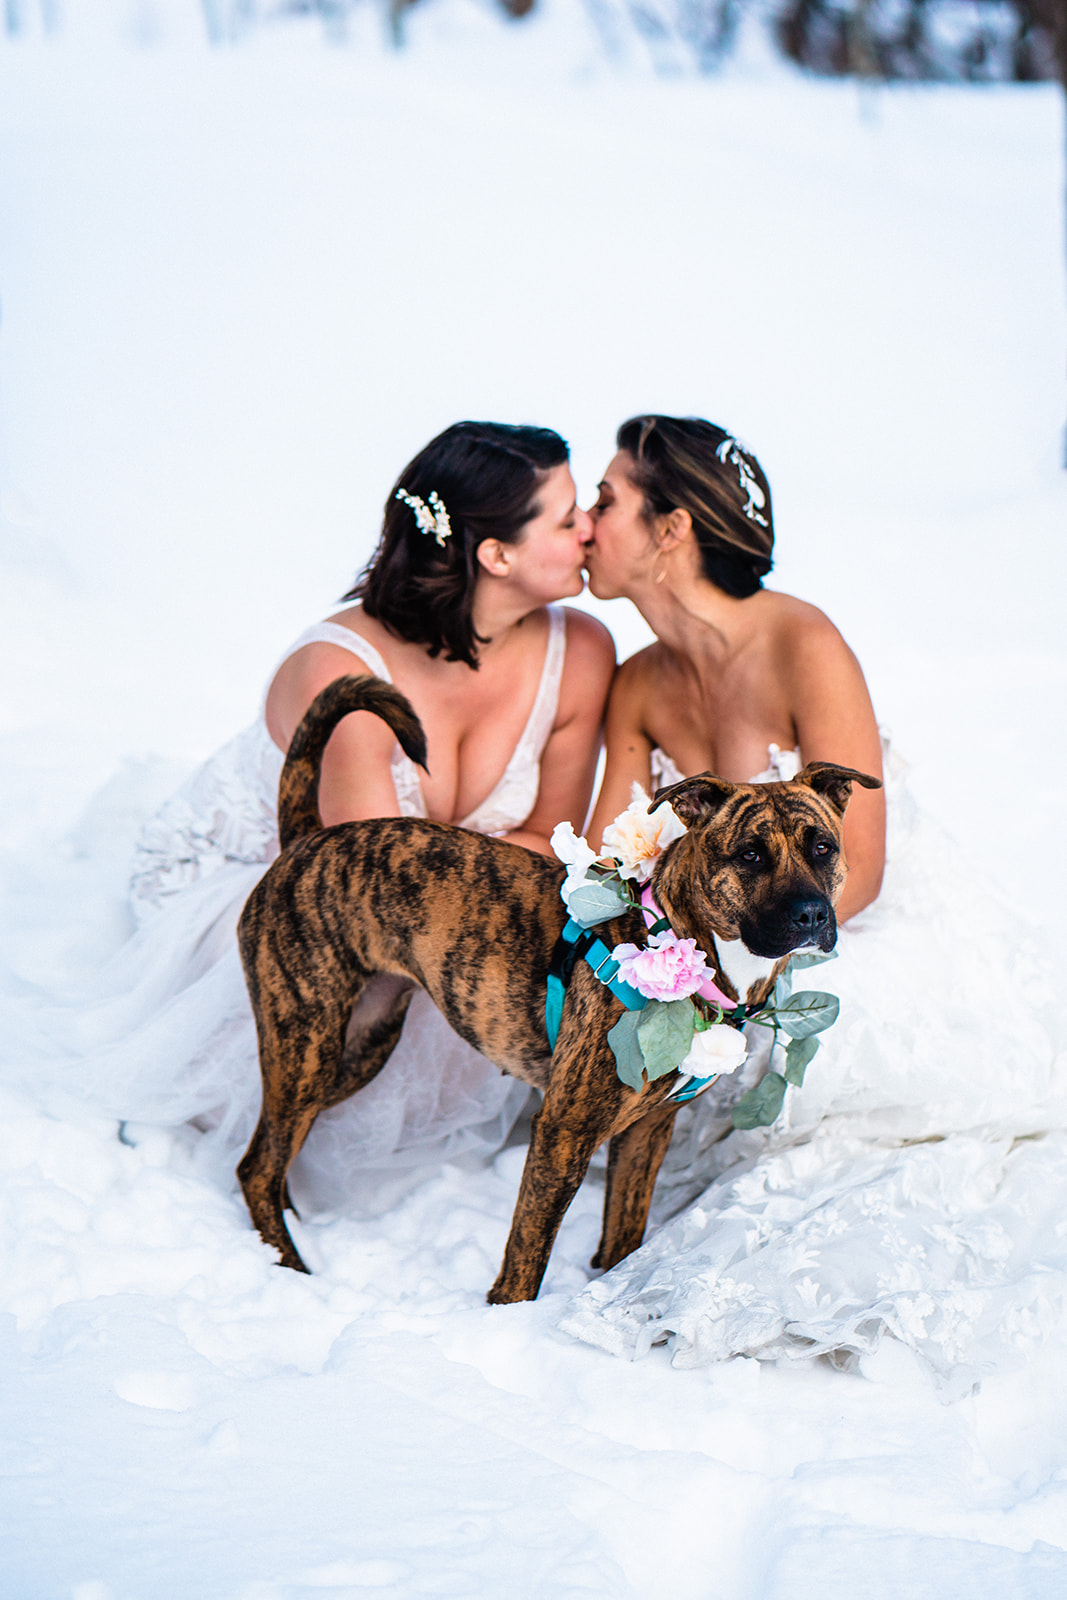 Lesbian couple kissing in the snow with their pup standing next to them